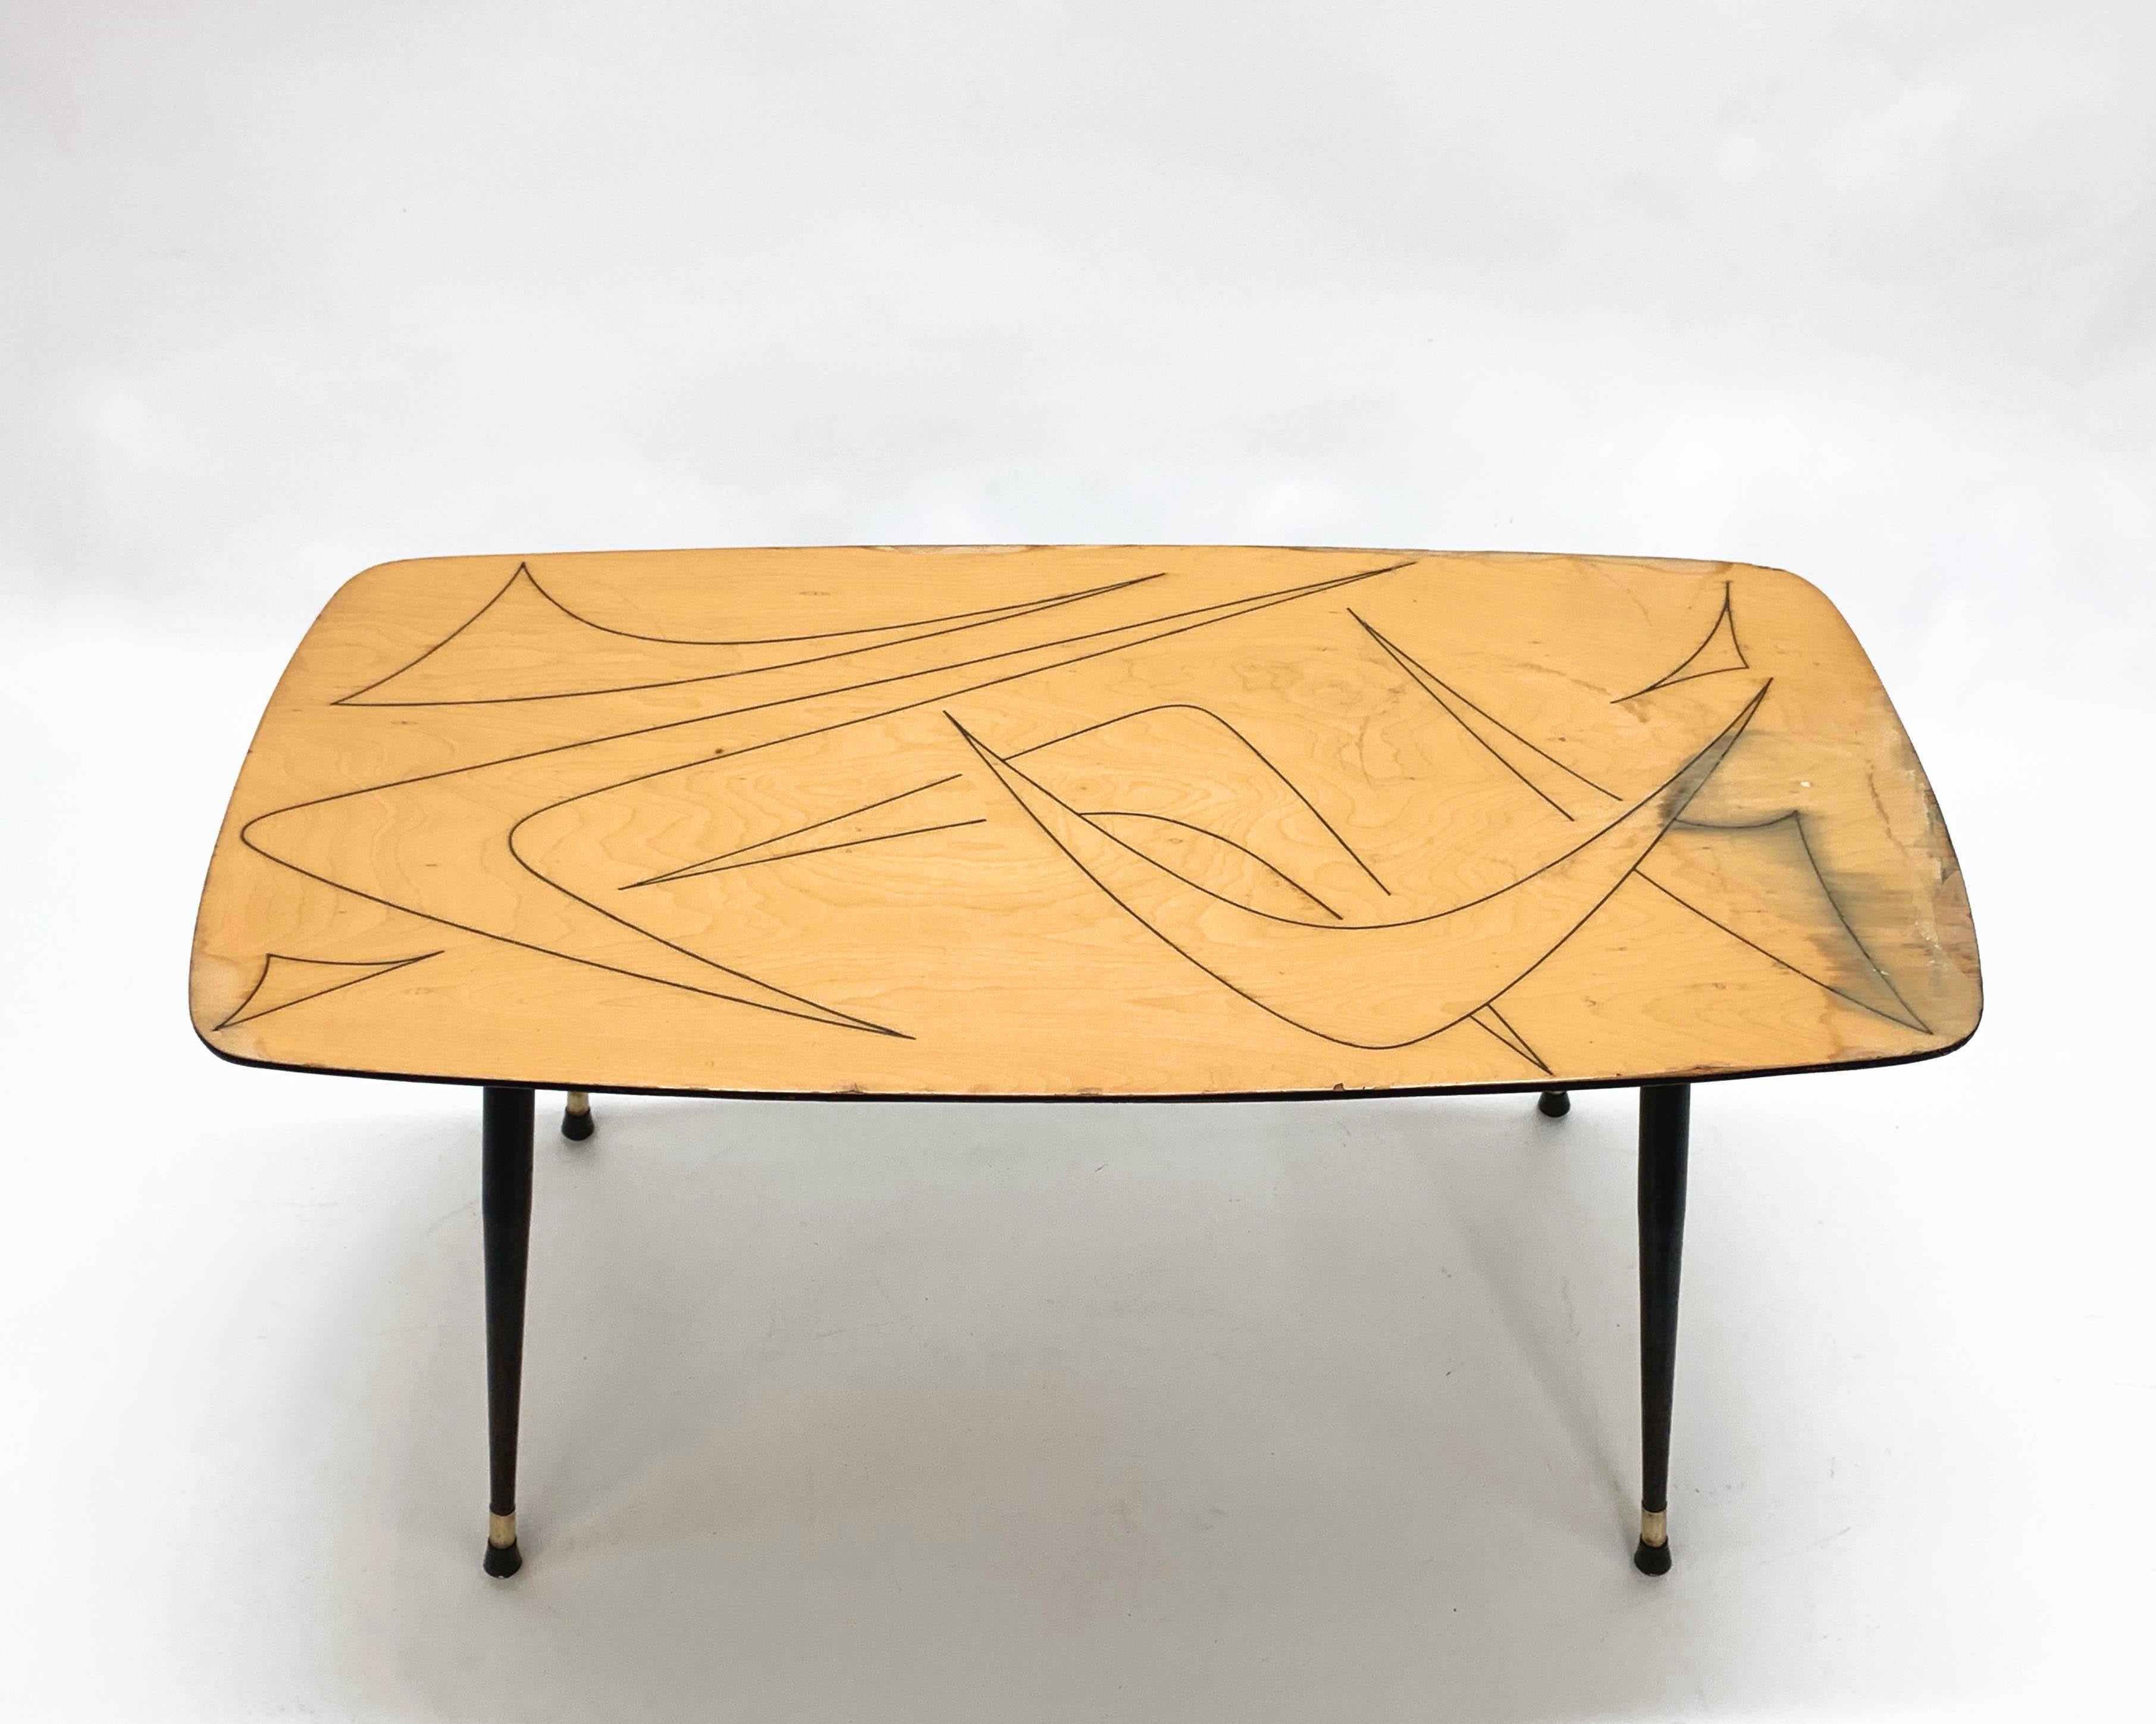 Midcentury Italian Painted Wood, Brass and Black Metal Coffee Table, 1950s For Sale 11